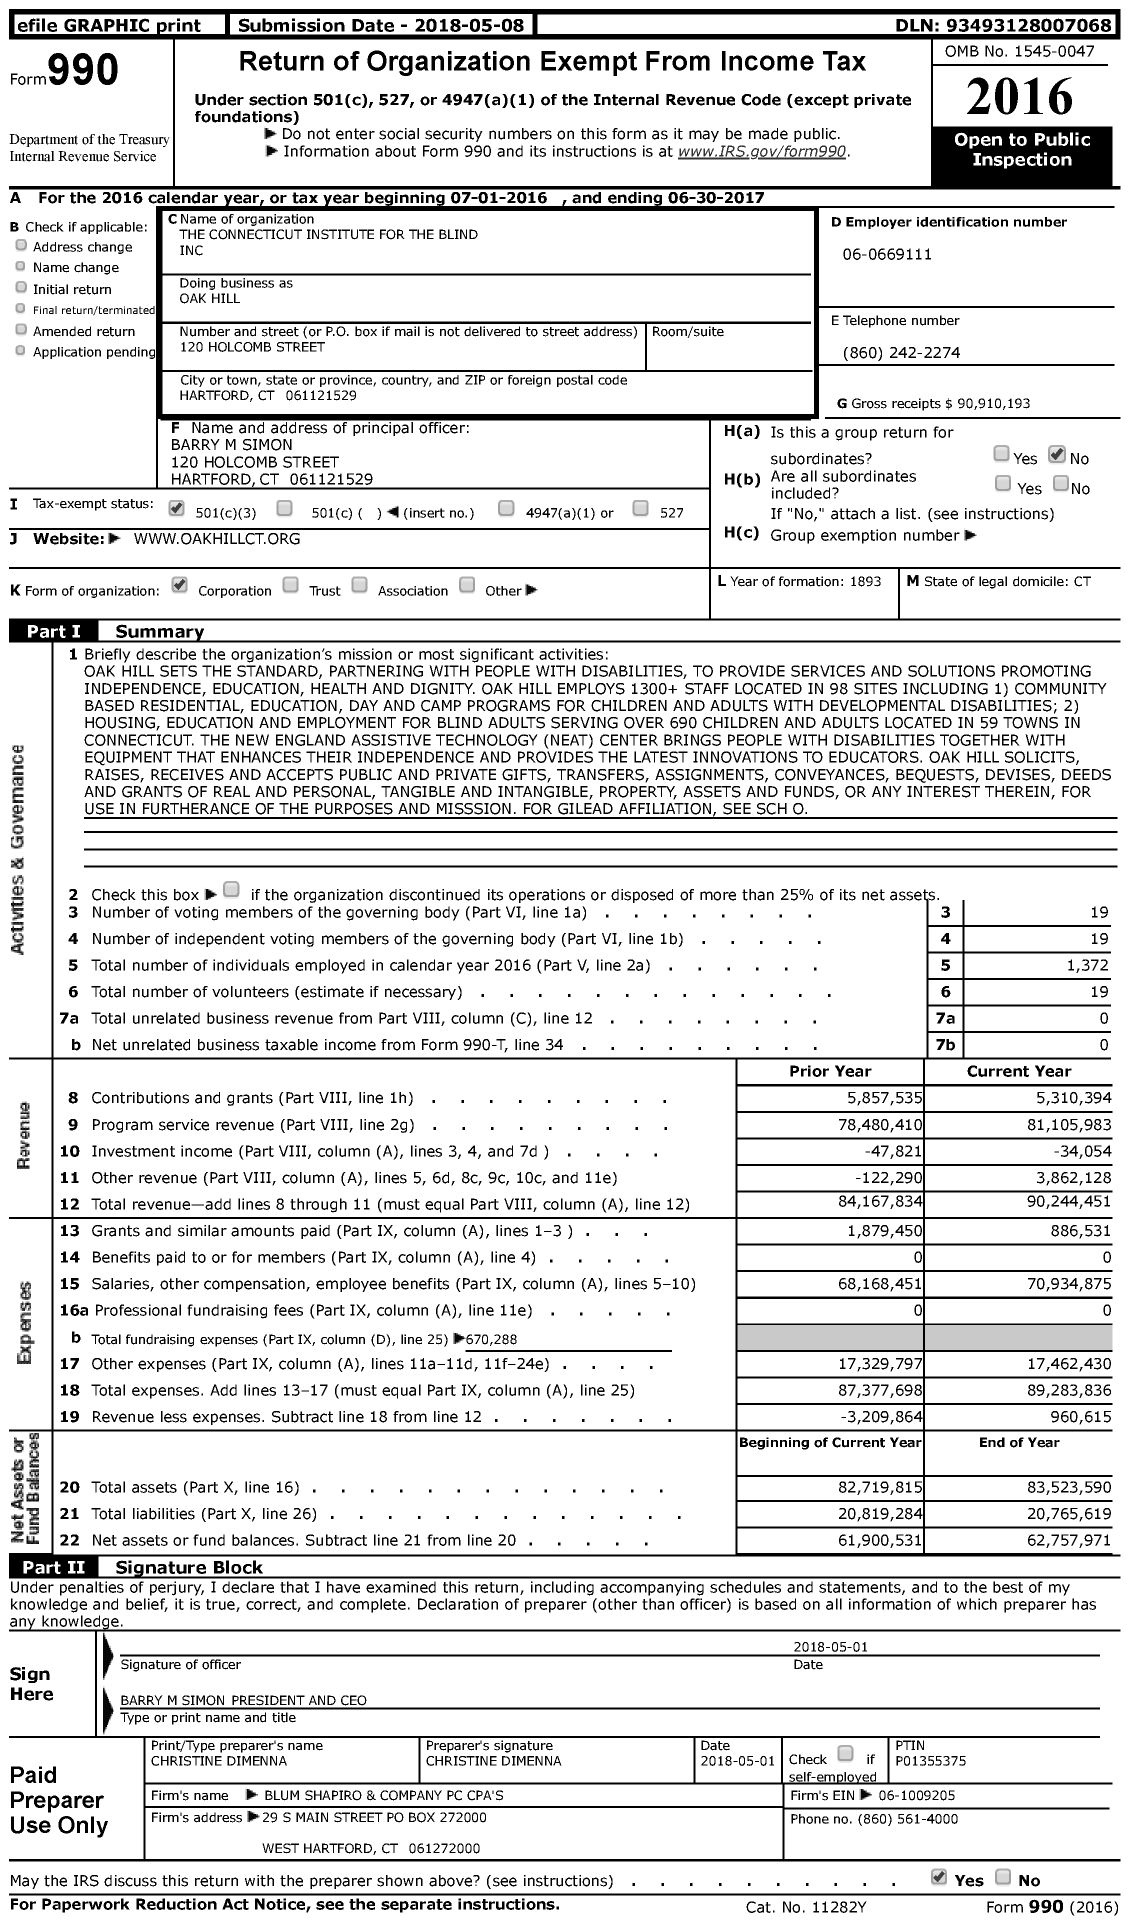 Image of first page of 2016 Form 990 for Oak Hill / The Connecticut Institute for the Blind Inc